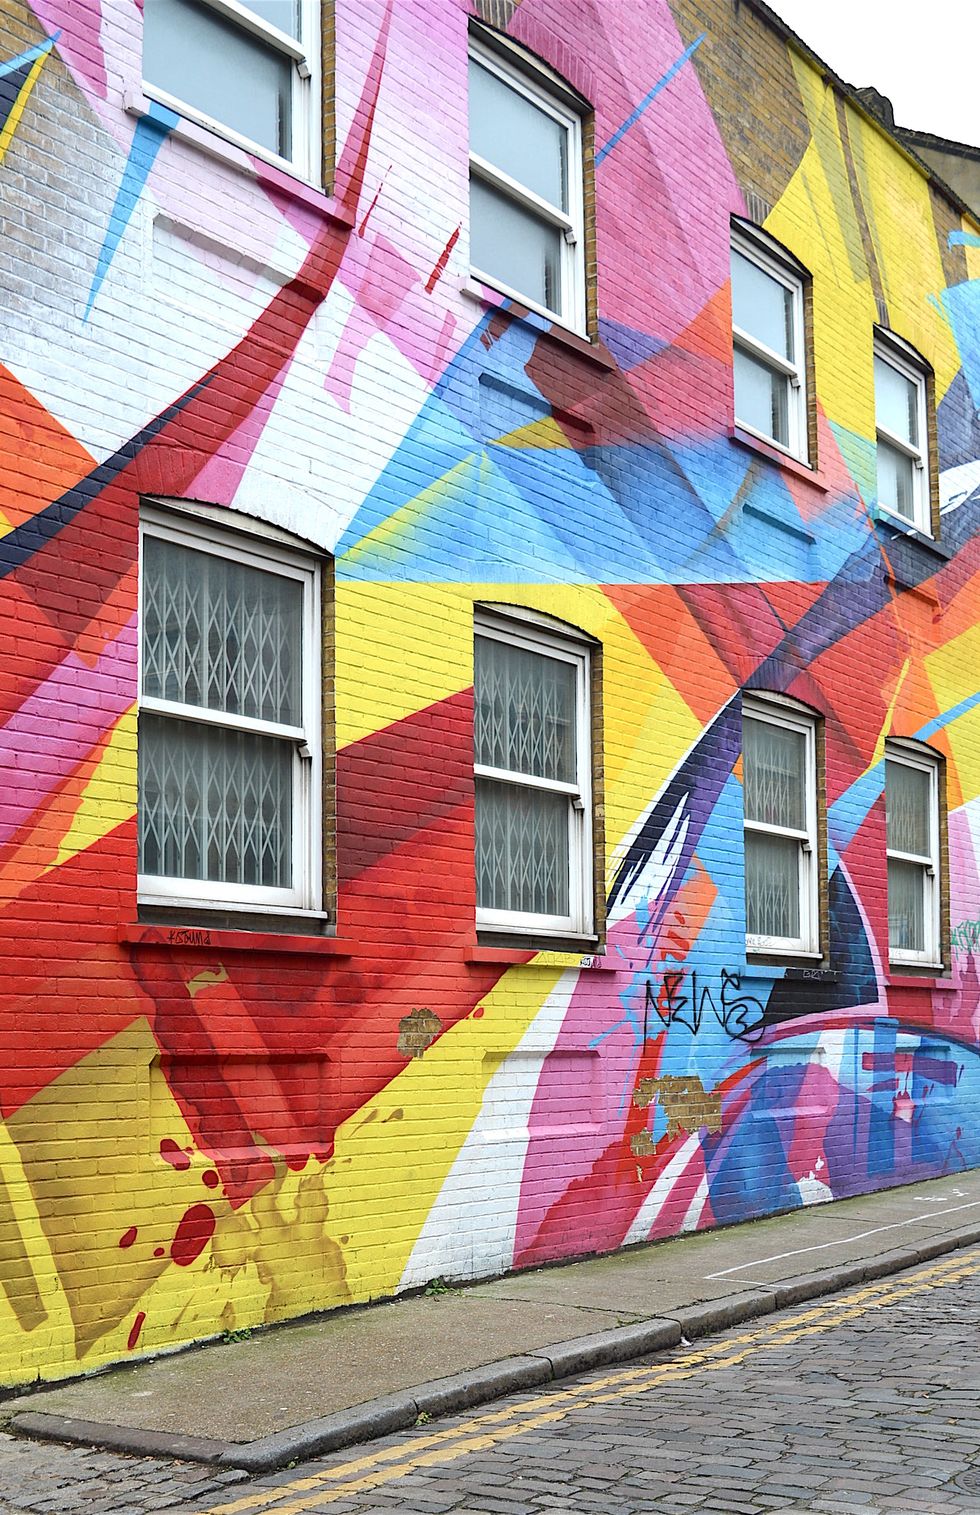         Shoreditch is one of the most lively areas of East London–and home to some of the most beautiful and alternative graffiti in the city. 